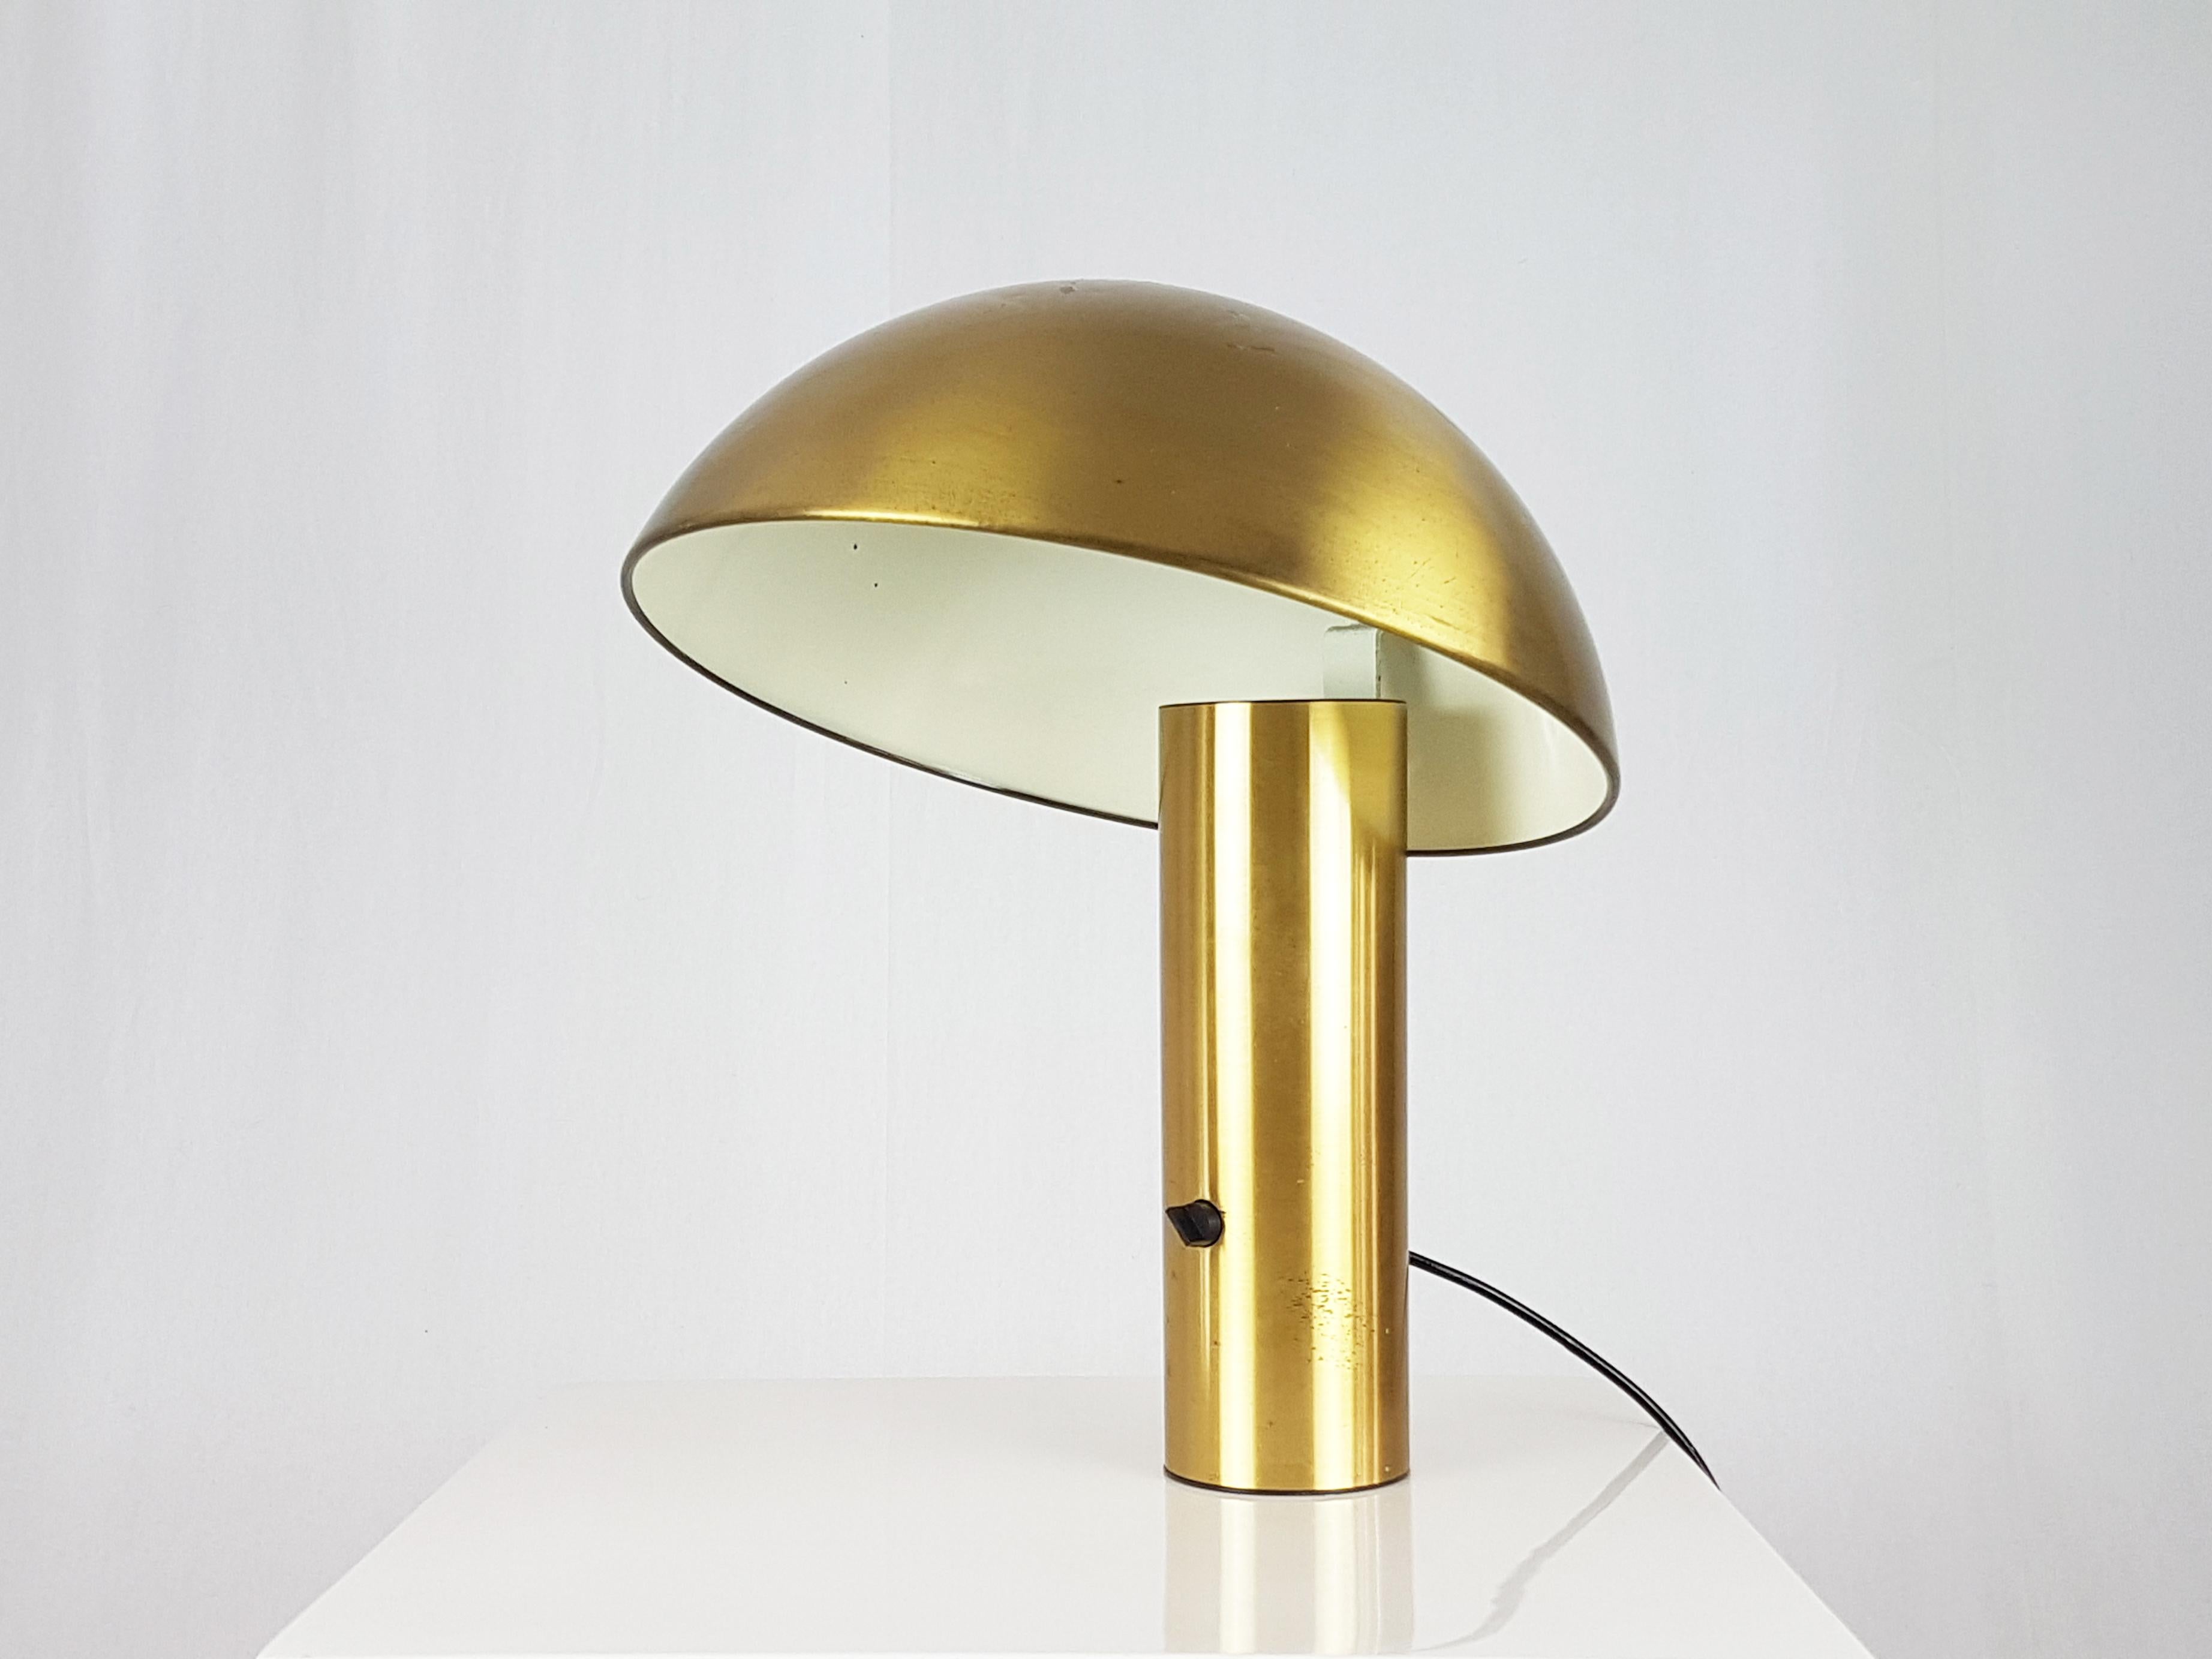 Space Age Brushed Brass Vaga Table Lamp by Franco Mirenzi for Valenti, 1978 For Sale